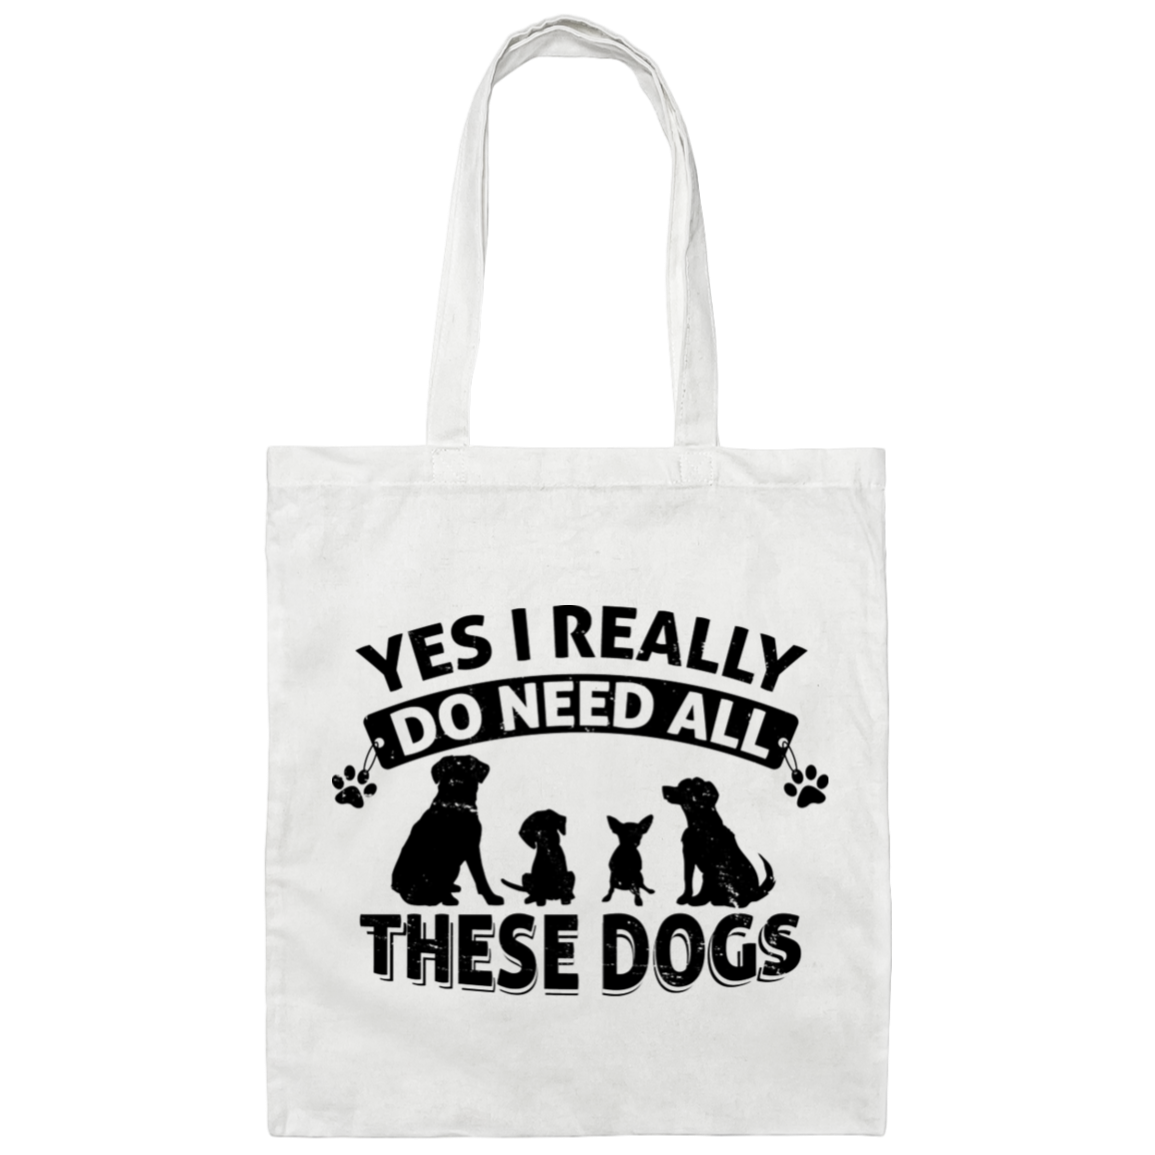 All These Dogs - Canvas Tote Bag